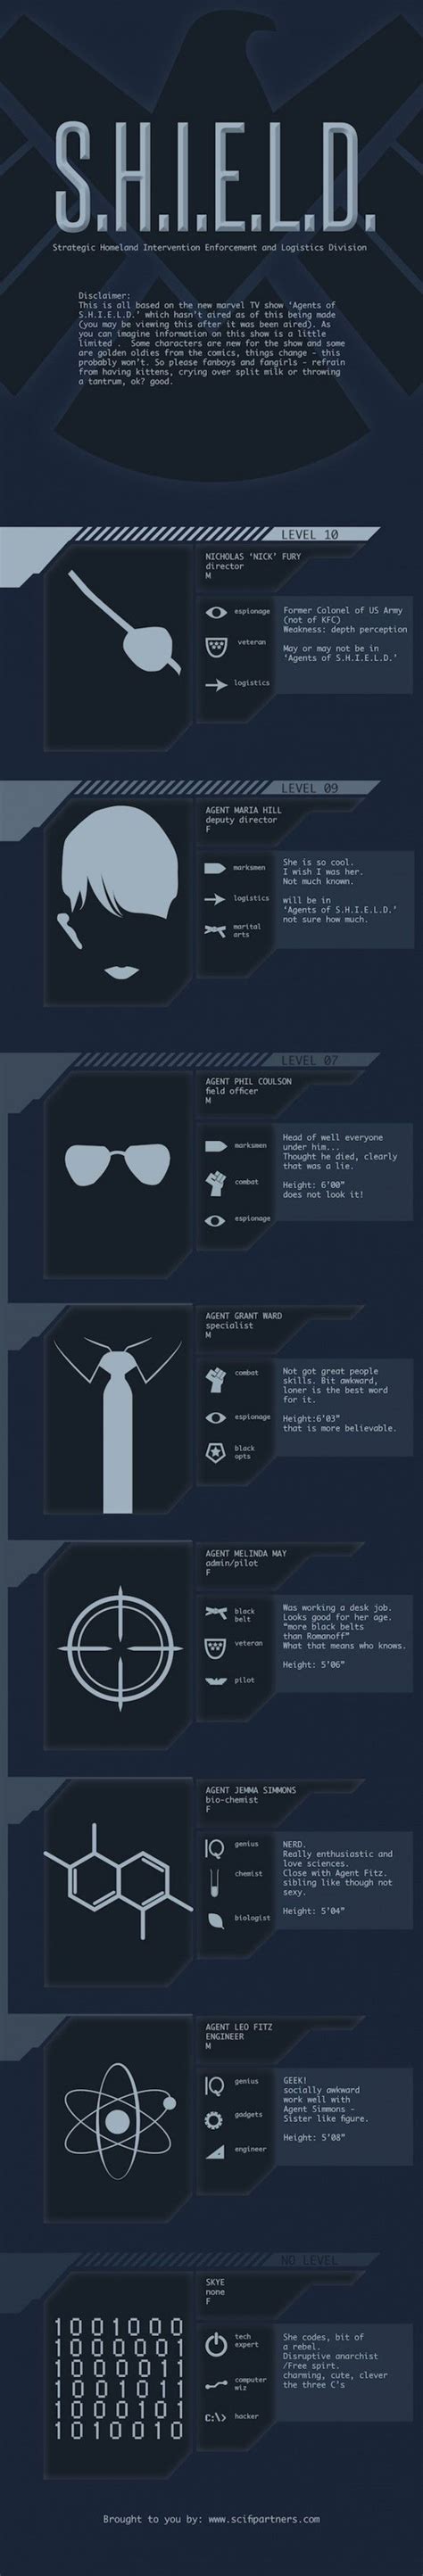 1000 Images About Marvel Infographics On Pinterest Iron Man Iron